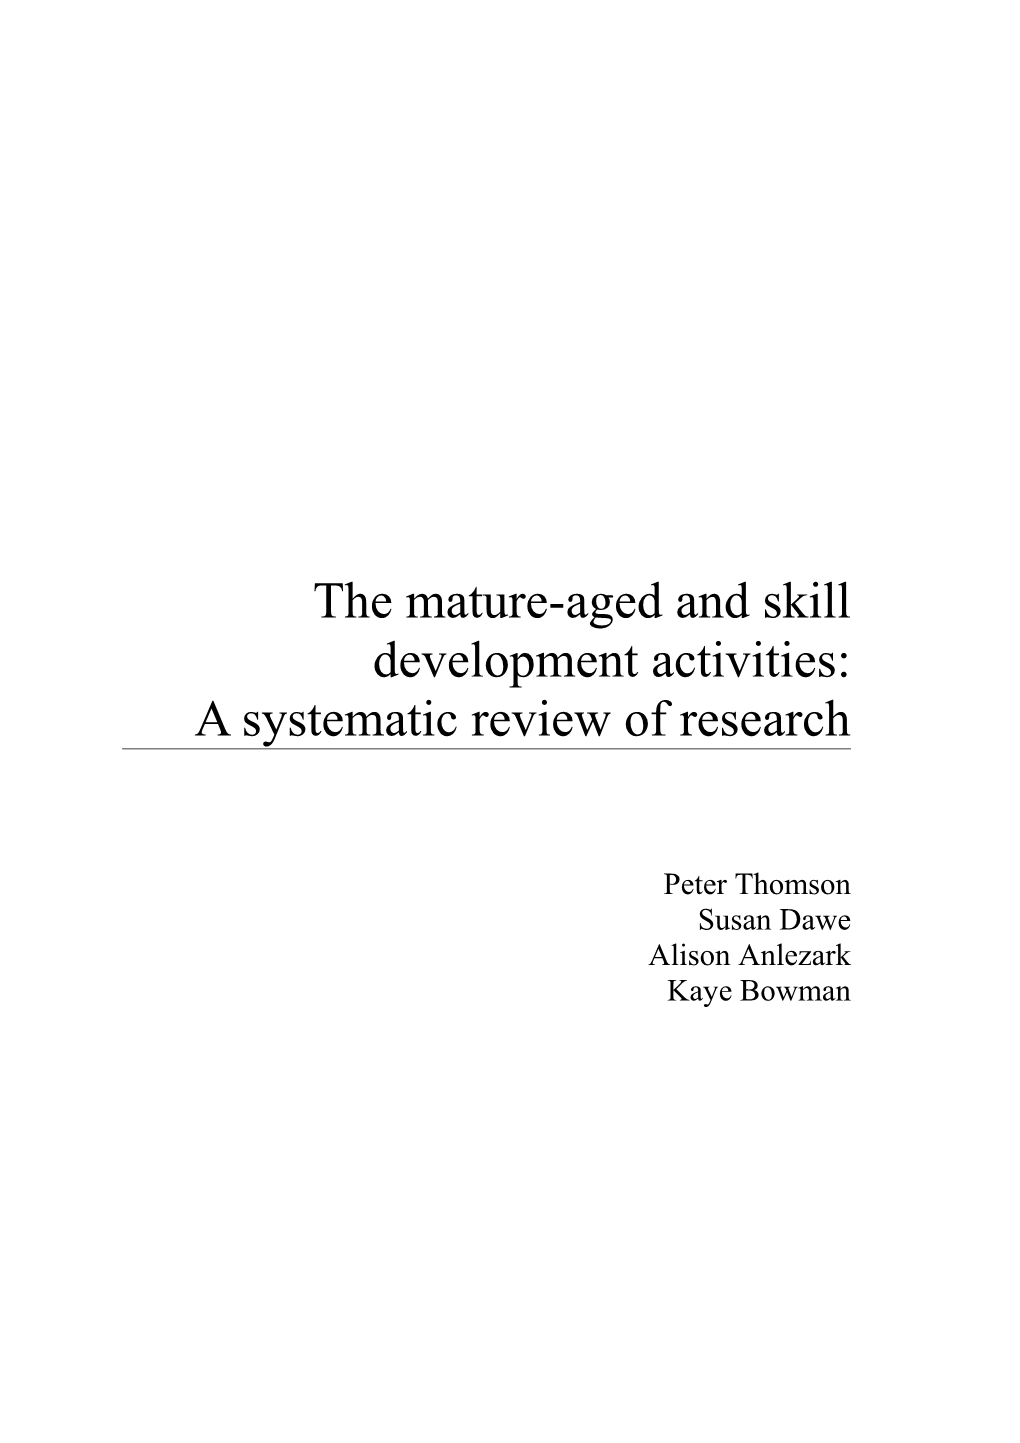 The Mature-Aged and Skill Development Activities:A Systematic Review of Research